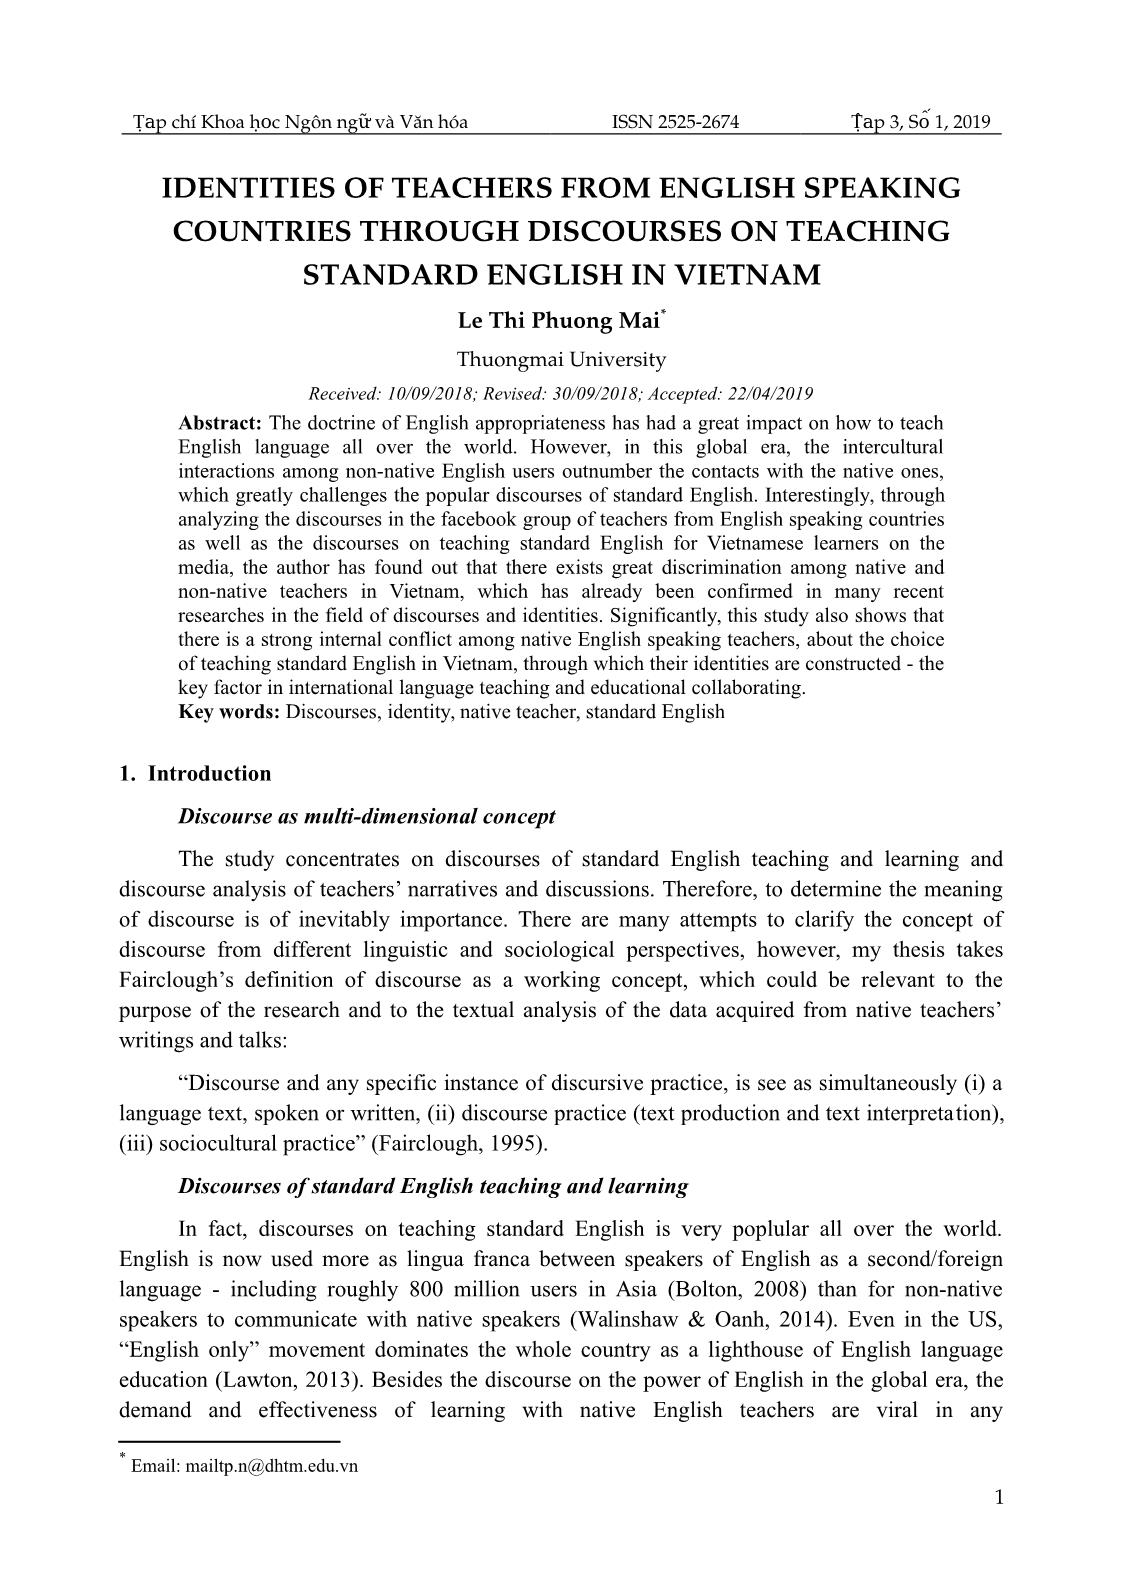 Identities of teachers from English speaking countries through discourses on teaching standard English in Vietnam trang 1